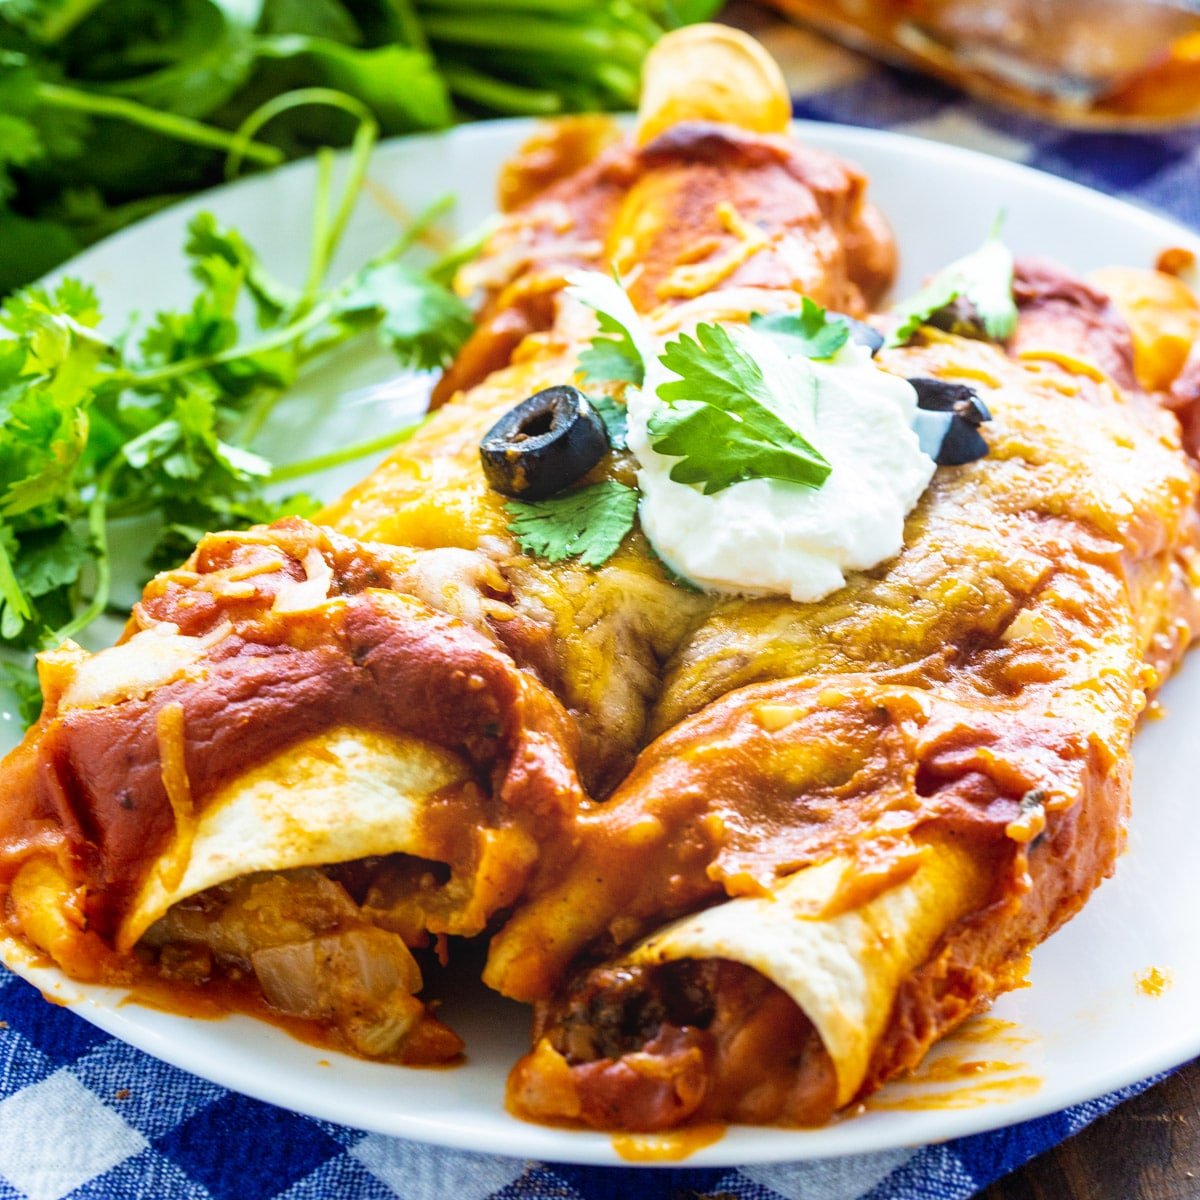 Two Ground Beef Enchiladas on a plate with cilantro.